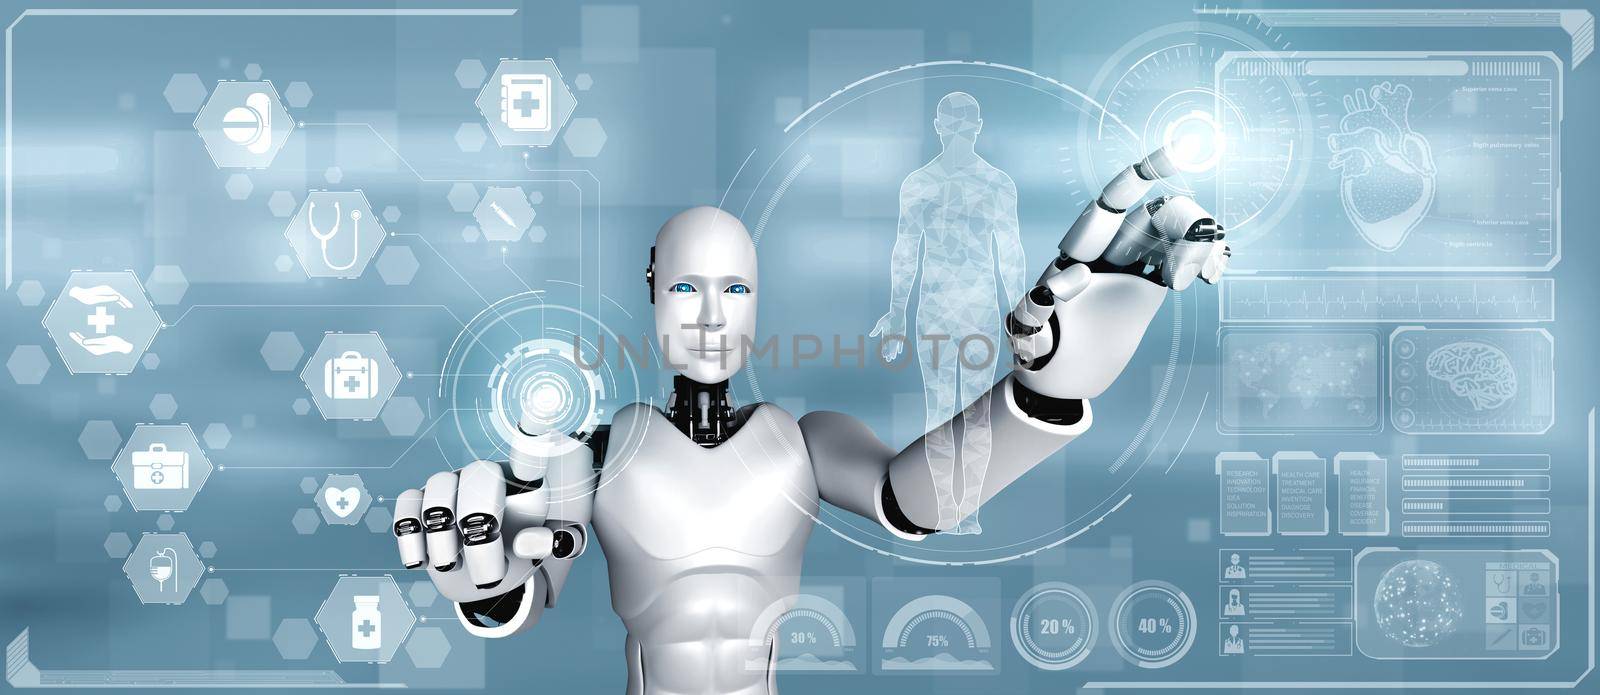 Future medical technology controlled by AI robot using machine learning by biancoblue